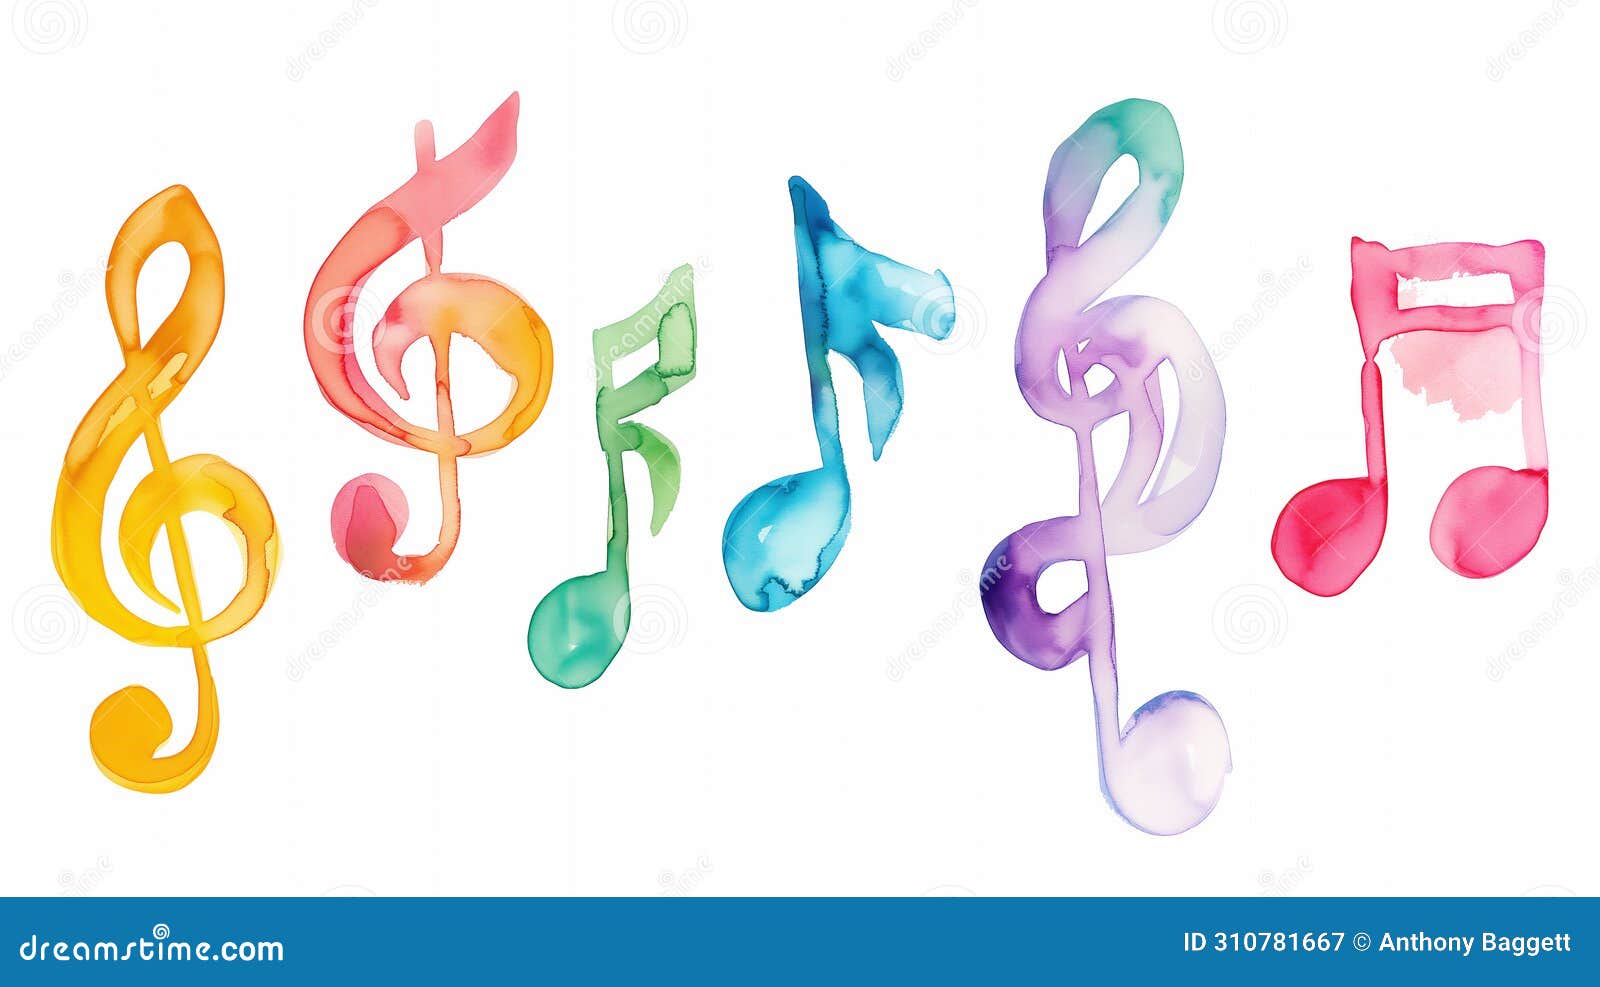 music note background  on a white background showing a colourful watercolour painting of a treble clef and crotchets in a